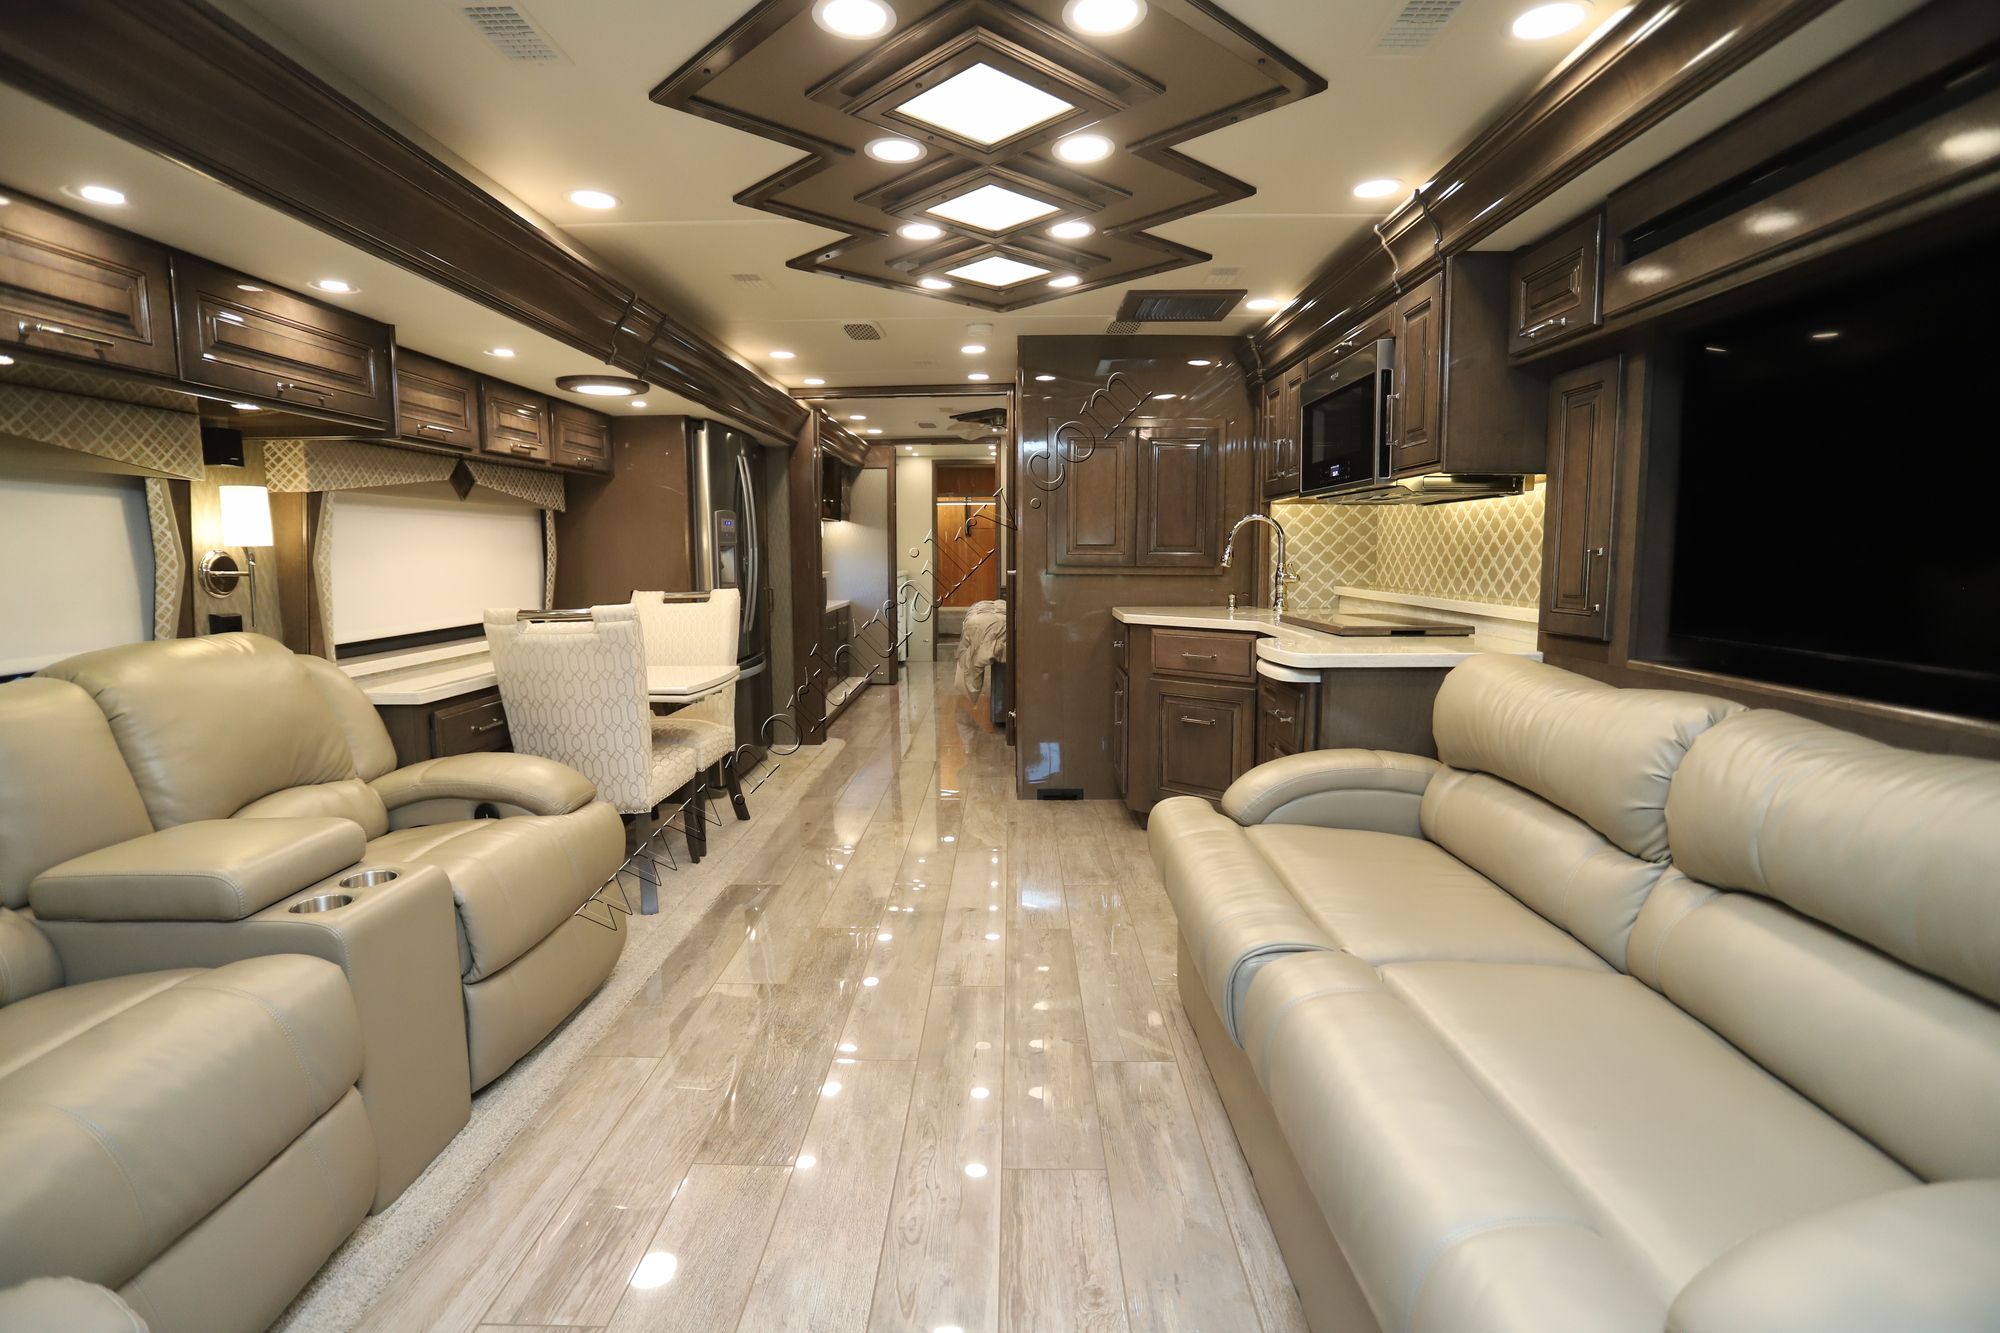 Used 2020 Entegra Anthem 44F Class A  For Sale